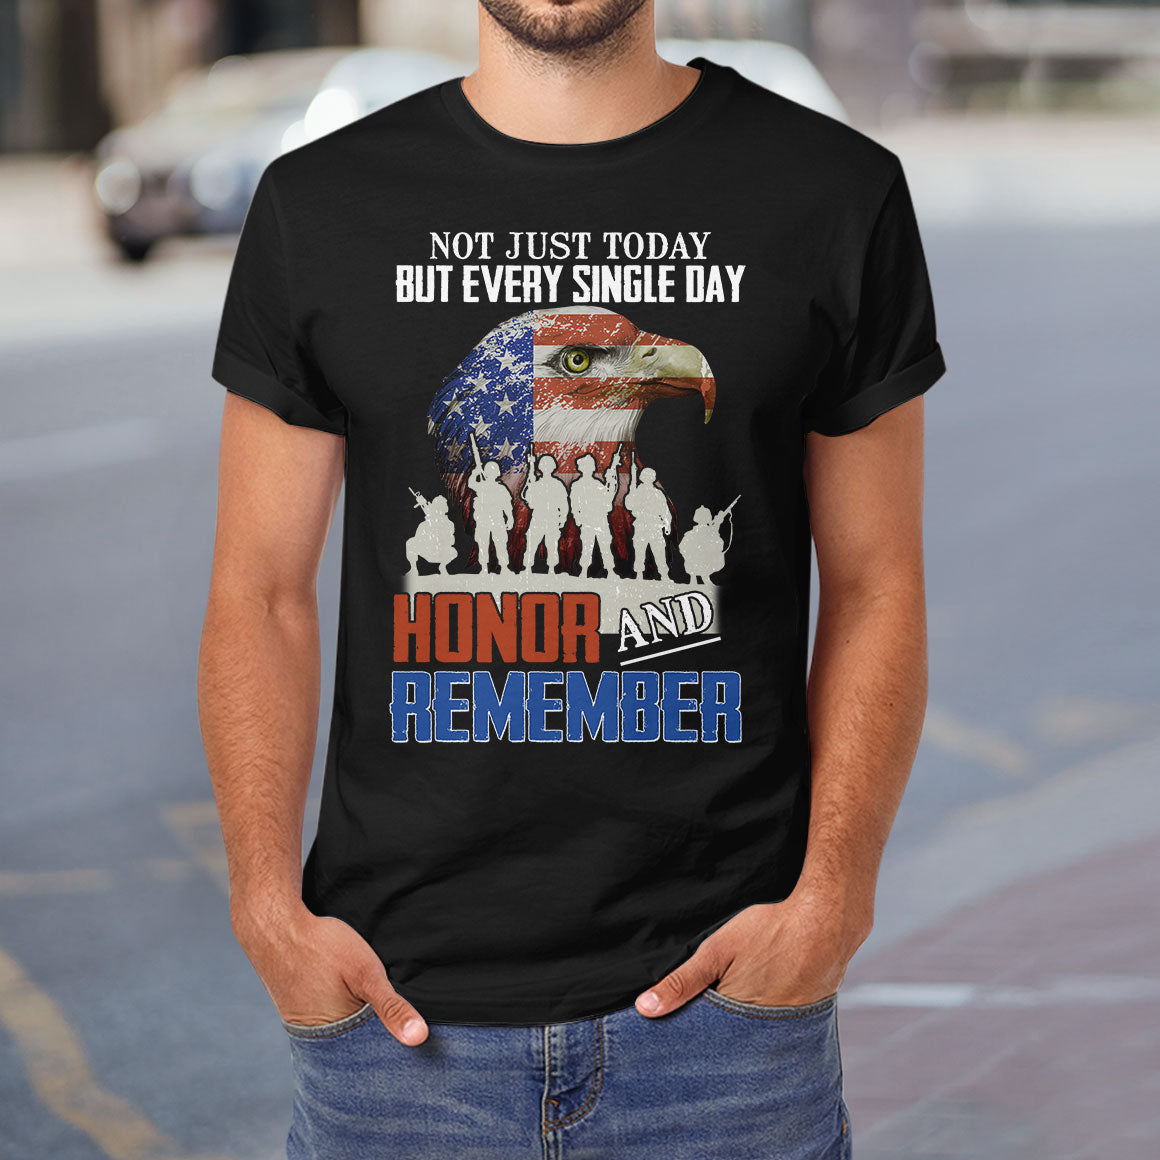 Veteran Not Just Today But Every Single Day Honor And Remember LHGB0305003Y Dark Classic T Shirt